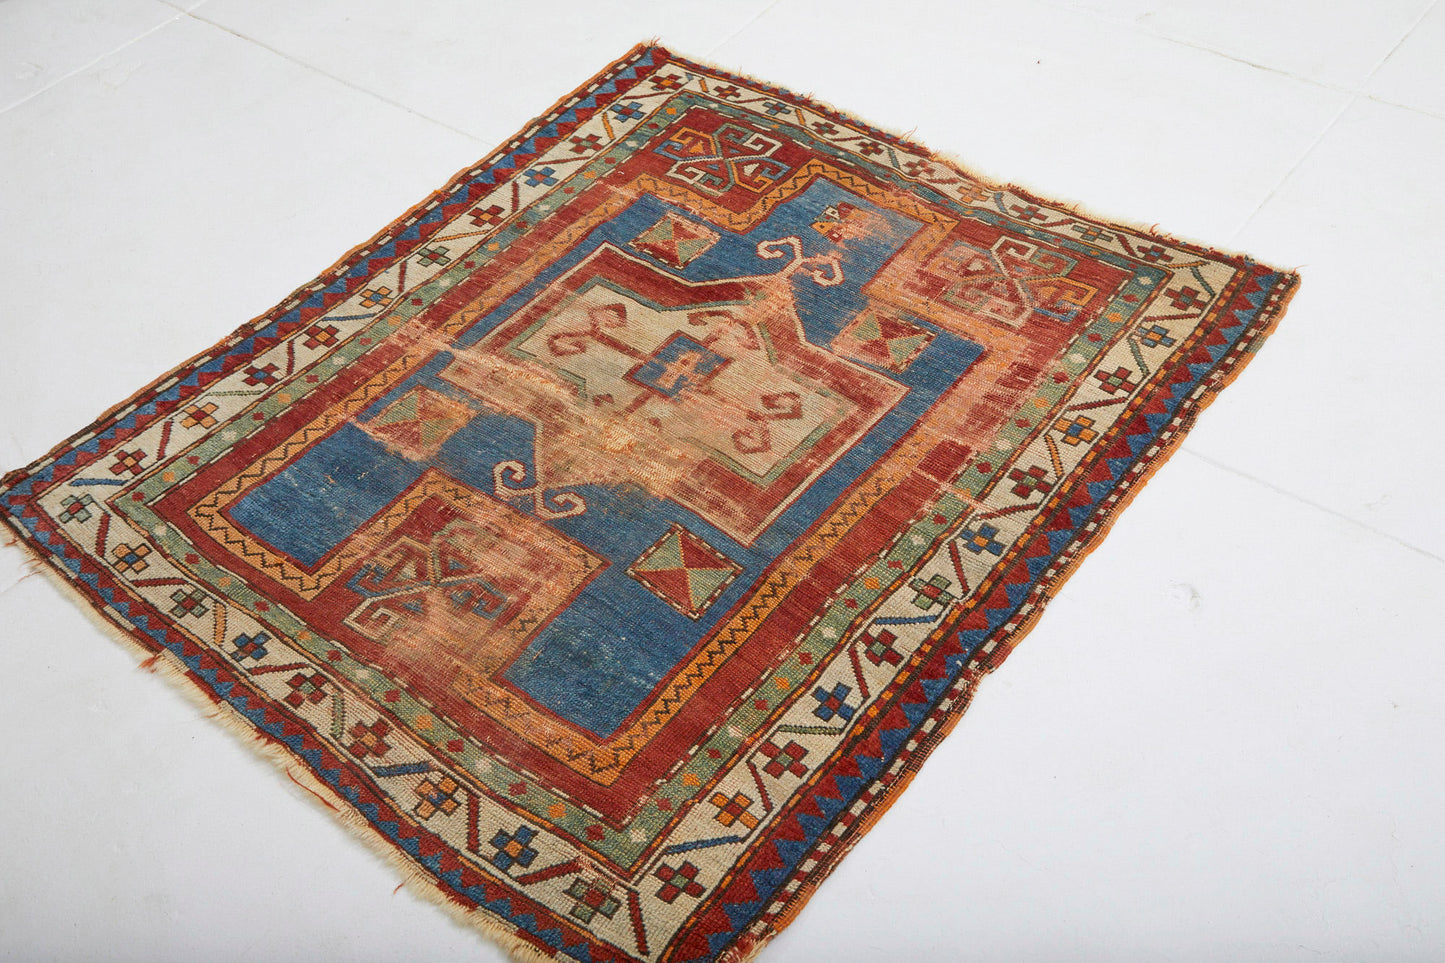 Antique Kazak Persian Rug with red, tan, blue and cream colors - Available from King Kennedy Rugs Los Angeles